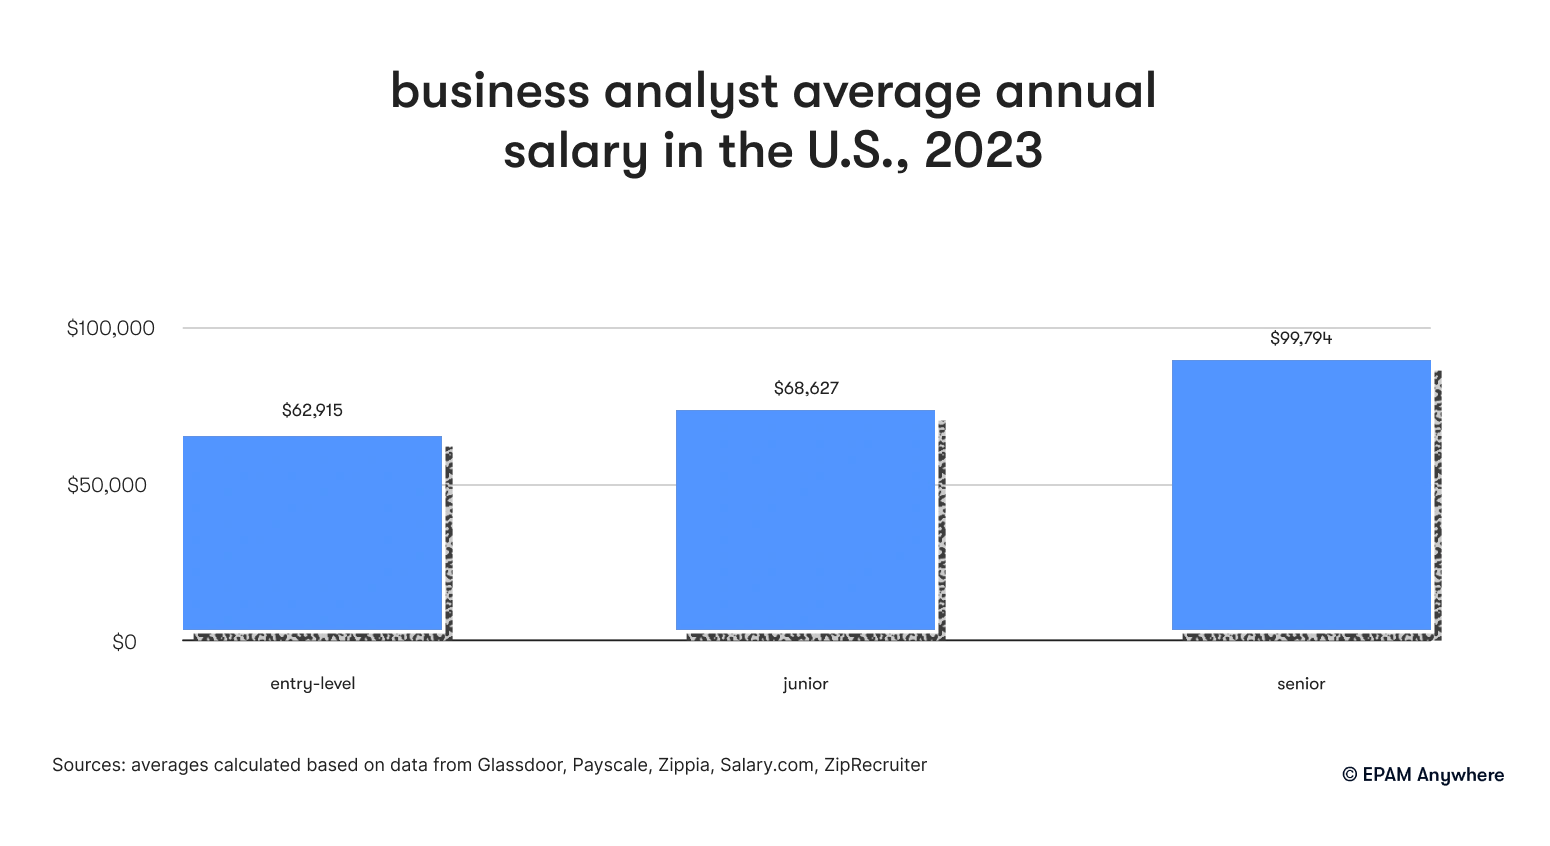 business analyst average annual salary in the U.S., 2023